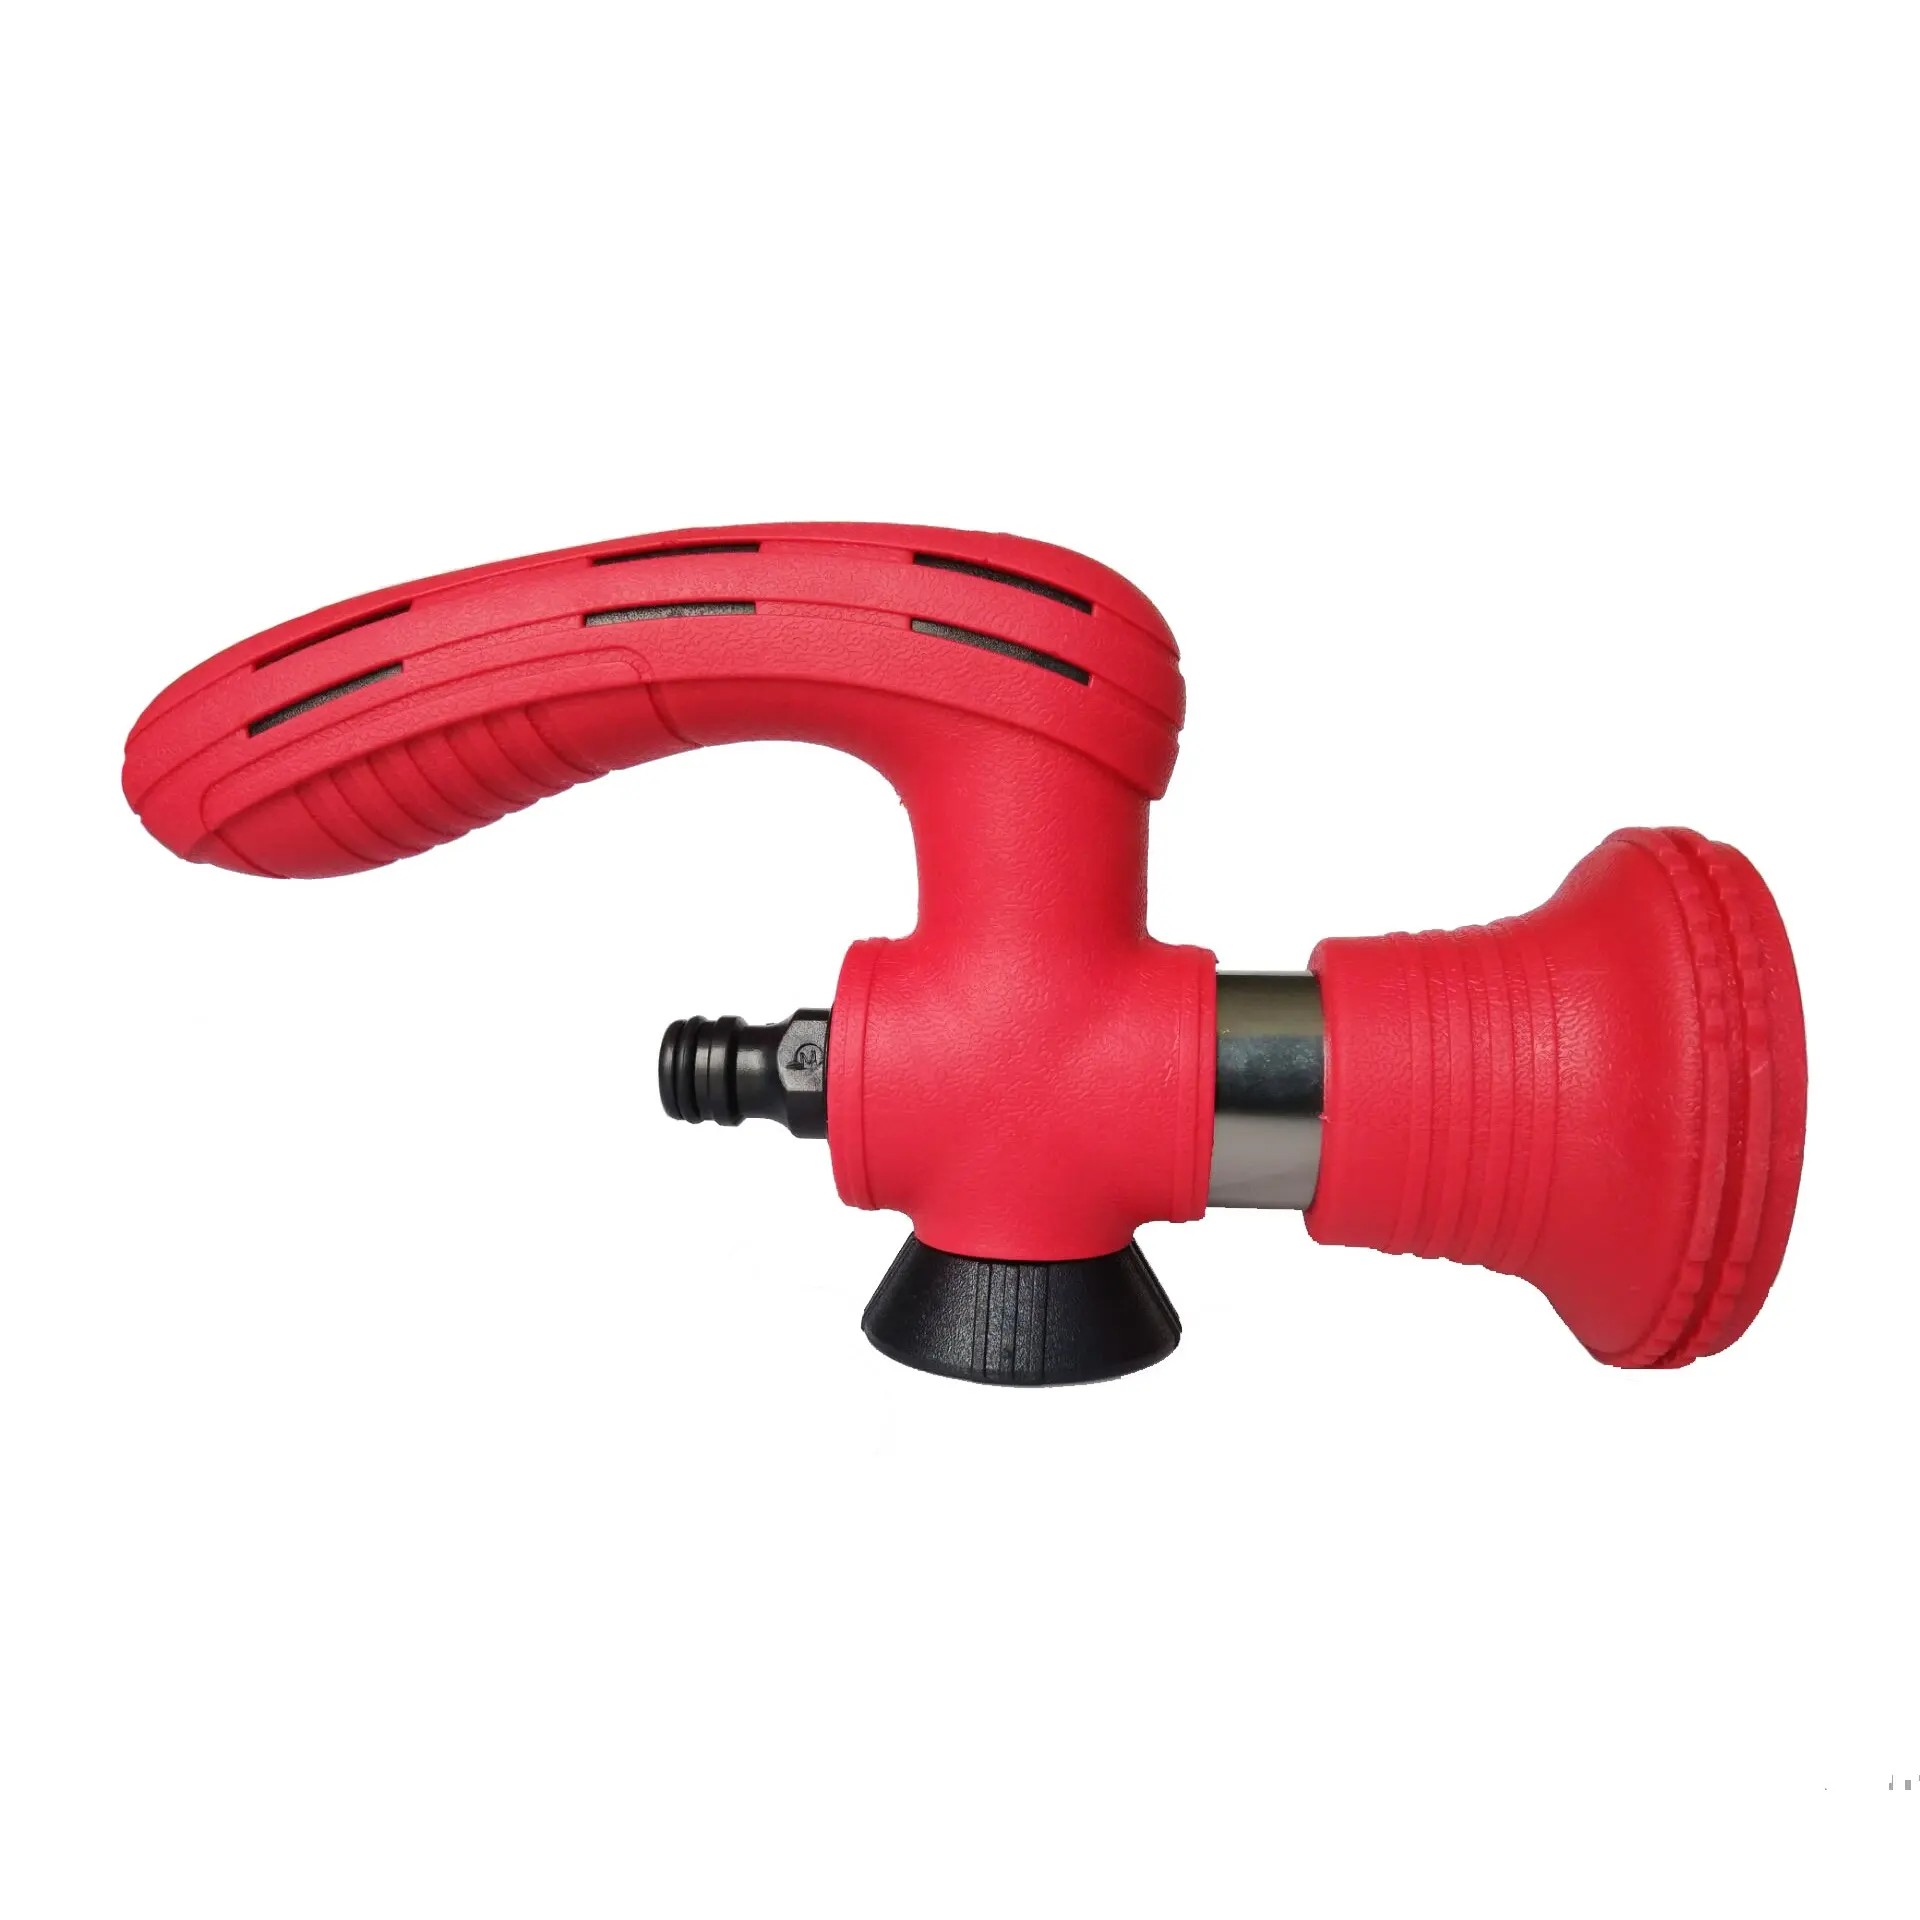 Portable Red Garden Water Hose Connect Car Wash Spray Heavy Duty Watering Fire Hose Water Nozzle